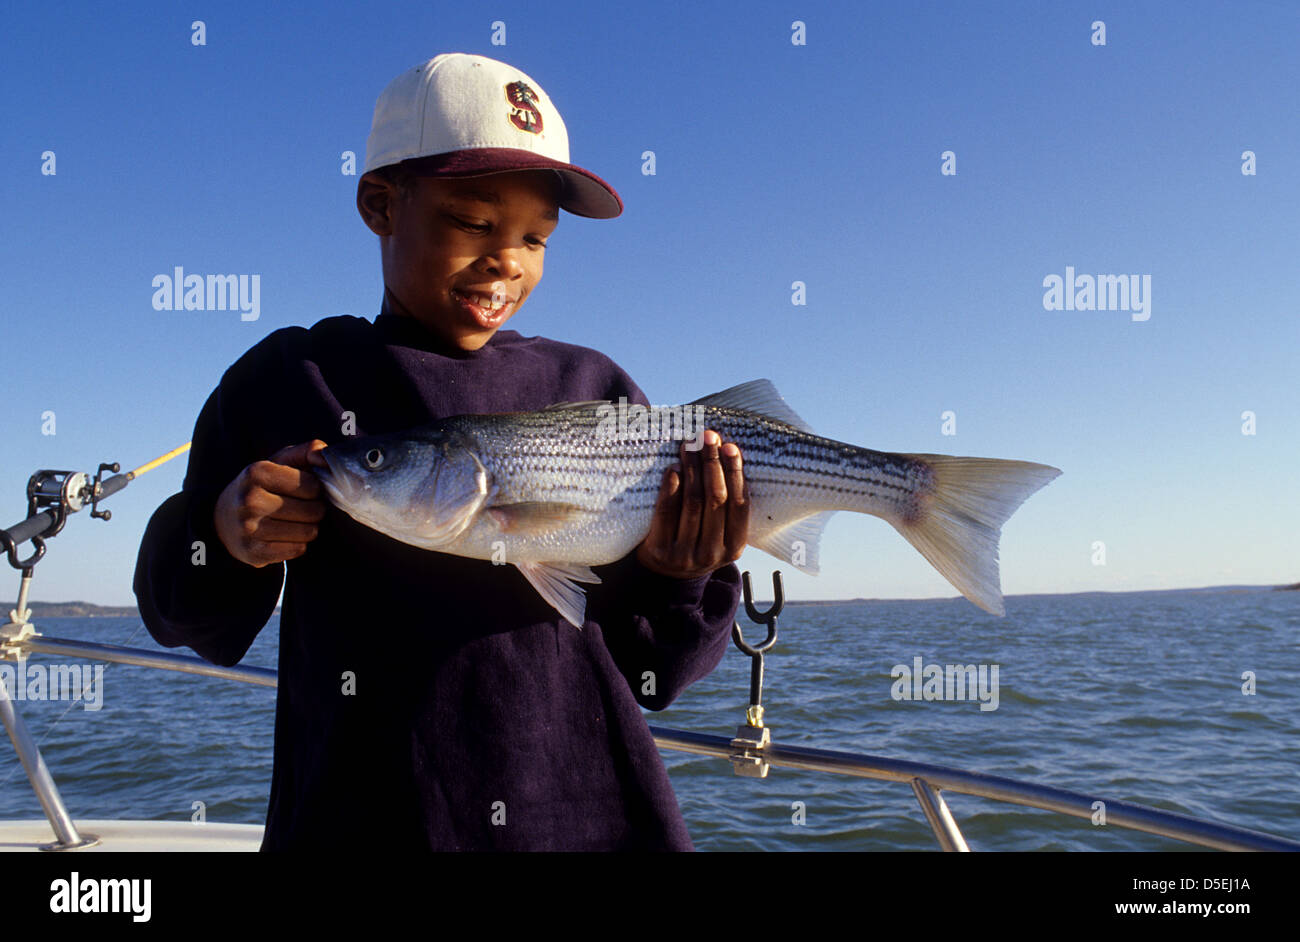 Young boy holding a freshwater striped bass (Morone saxatilis